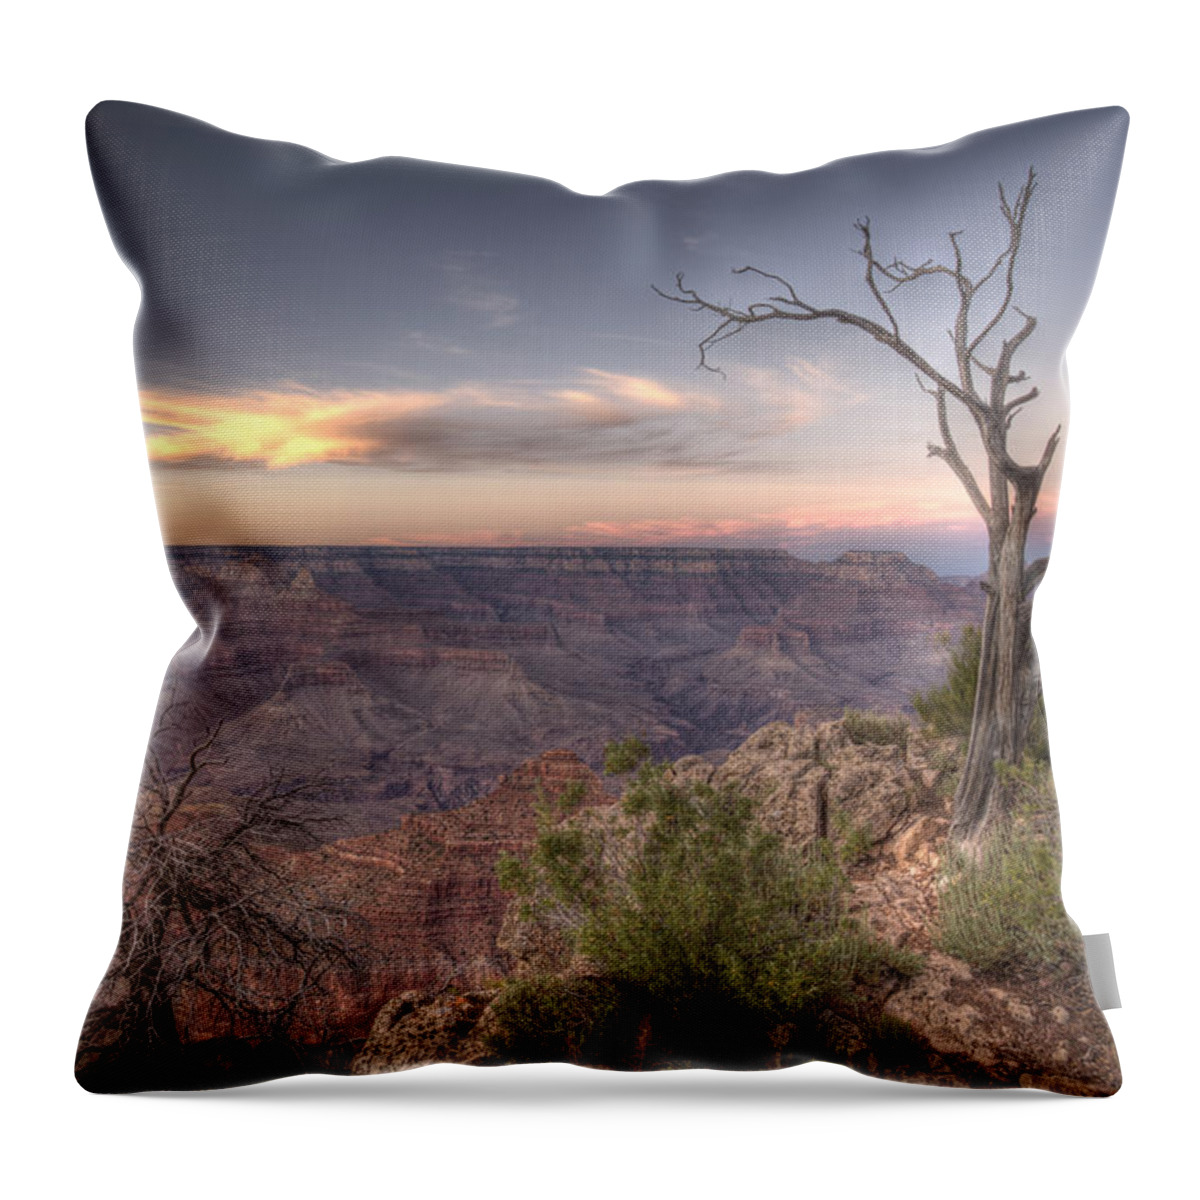 Grand Canyon Throw Pillow featuring the photograph Grand Canyon 991 by Michael Fryd